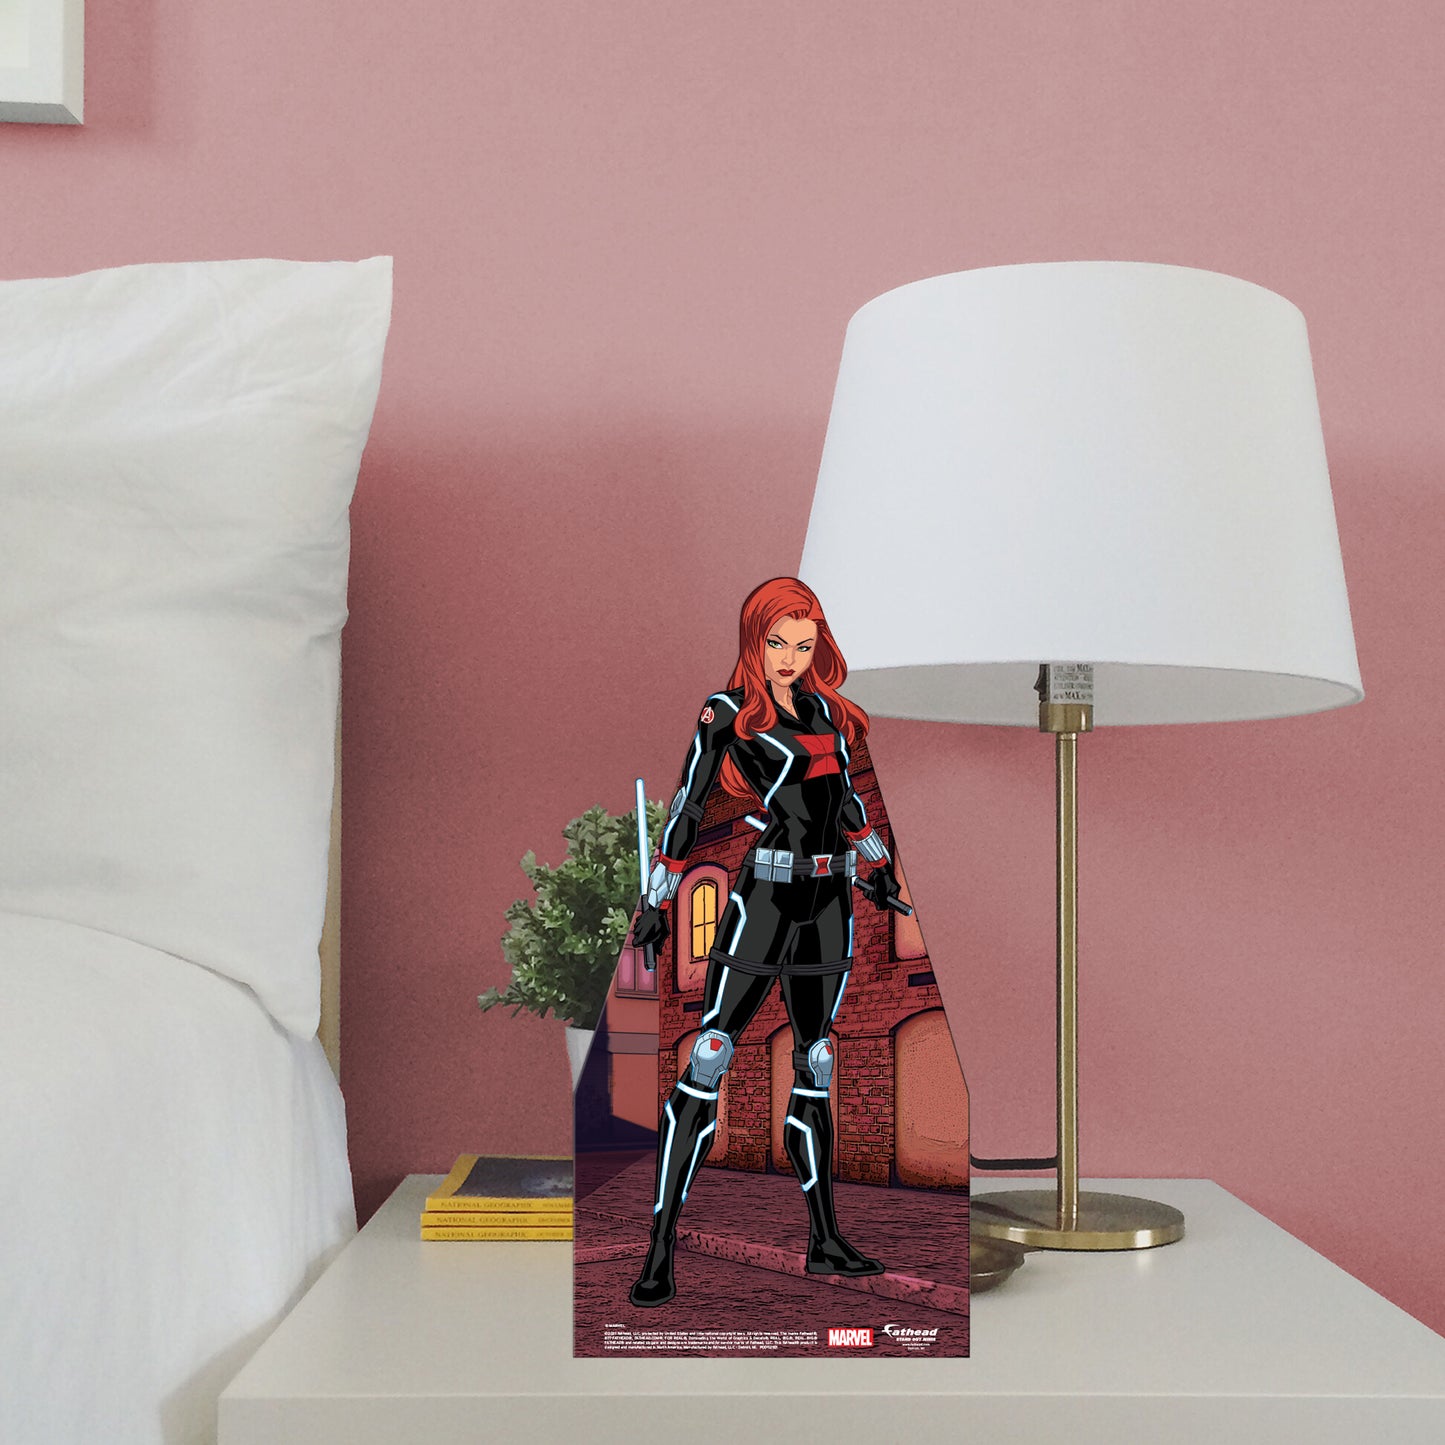 Avengers: BLACK WIDOW Mini   Cardstock Cutout  - Officially Licensed Marvel    Stand Out